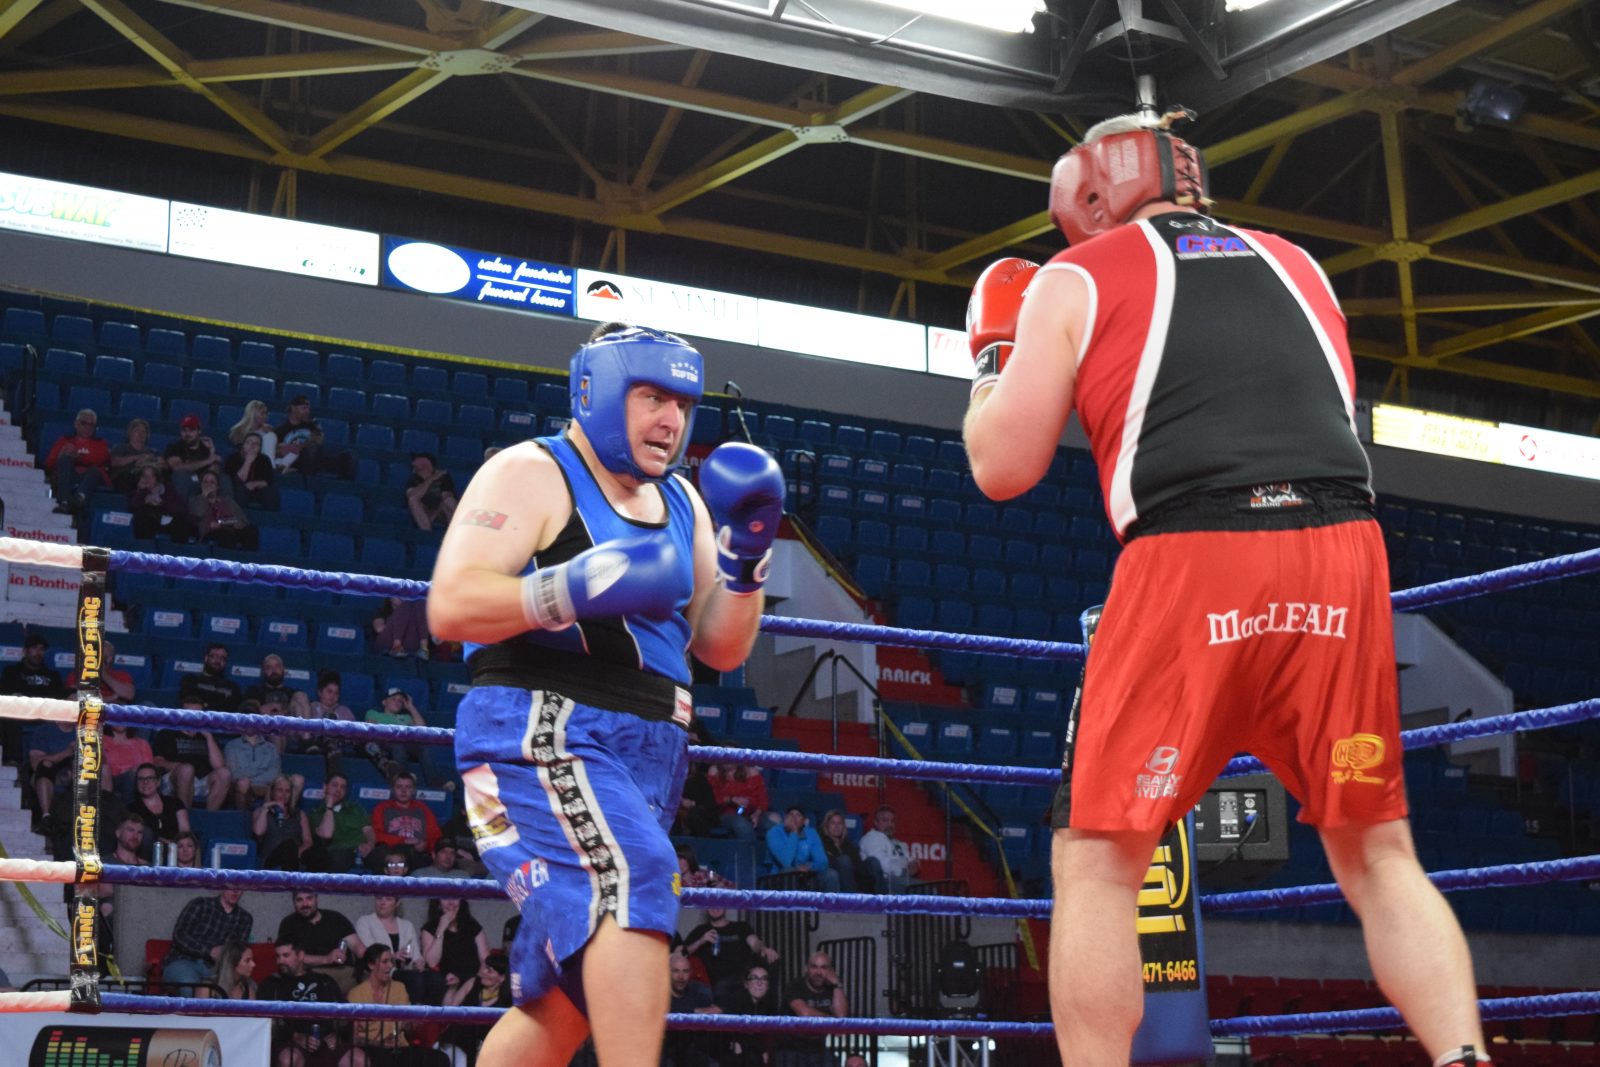 SLIDESHOW: Charities come out on top at Boxing for Change